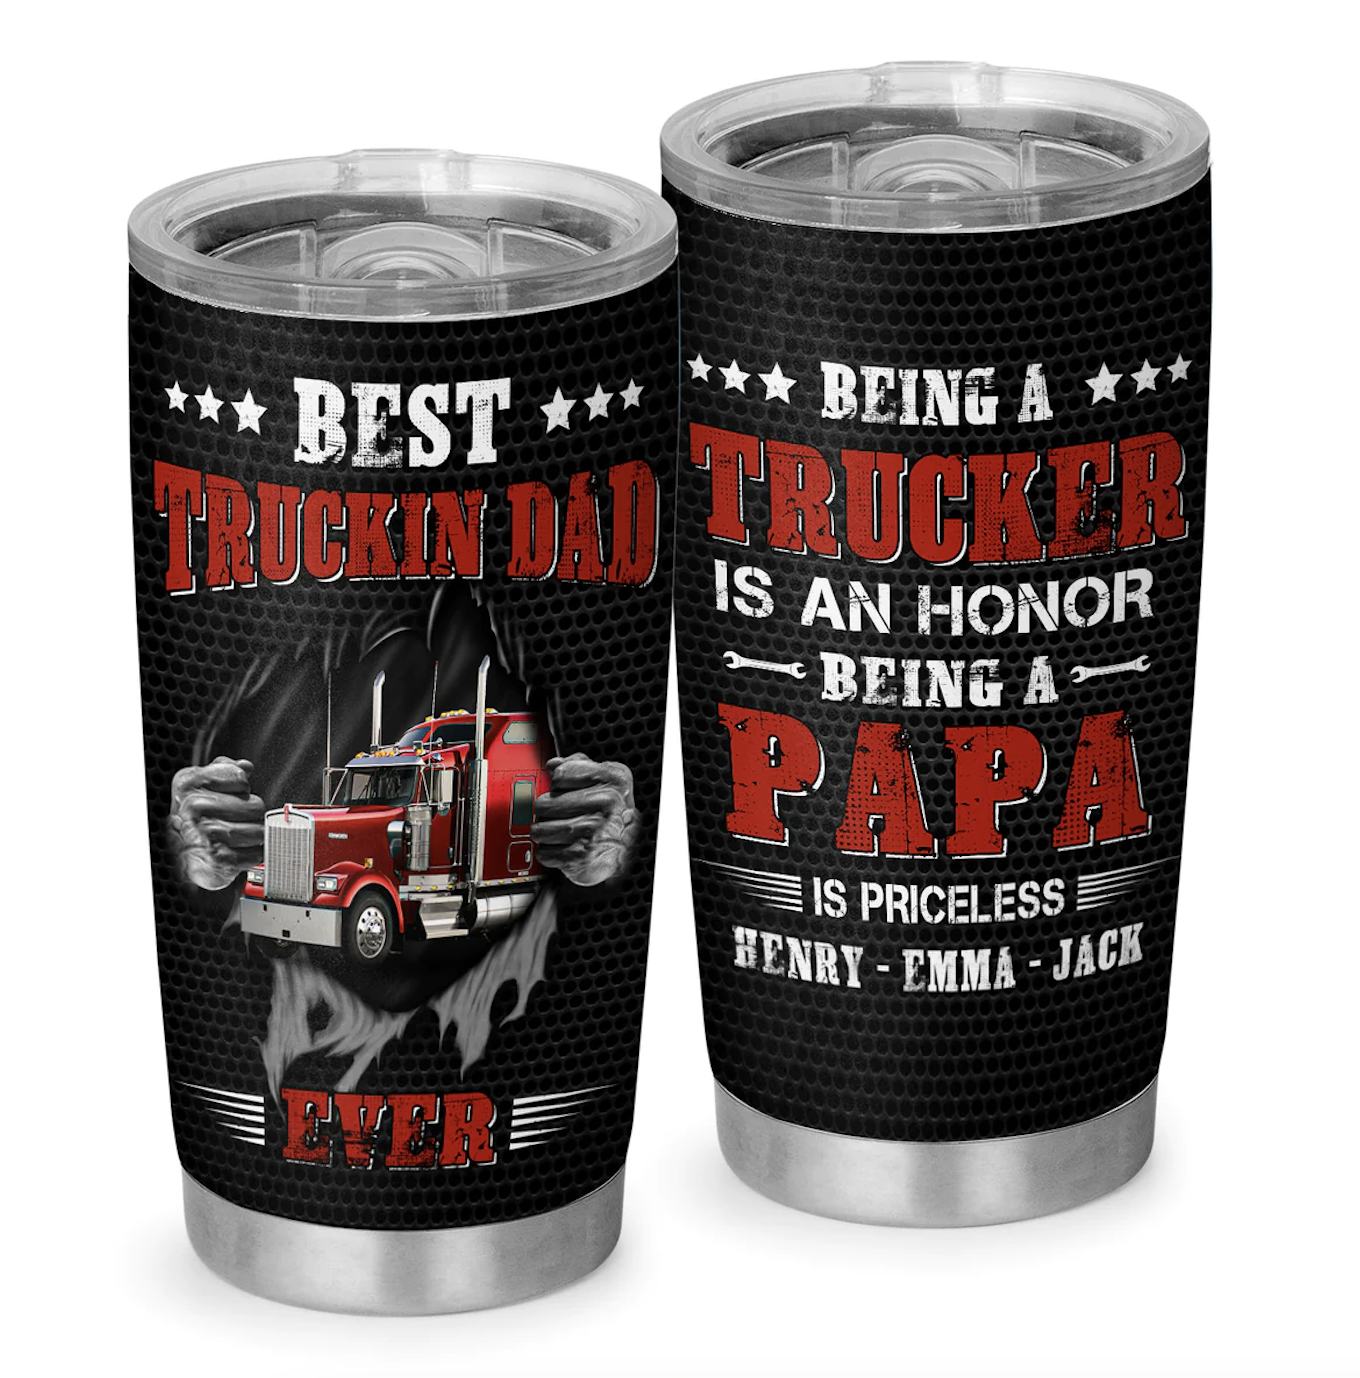 9 Great Gifts For The Truck Driver In Your Life